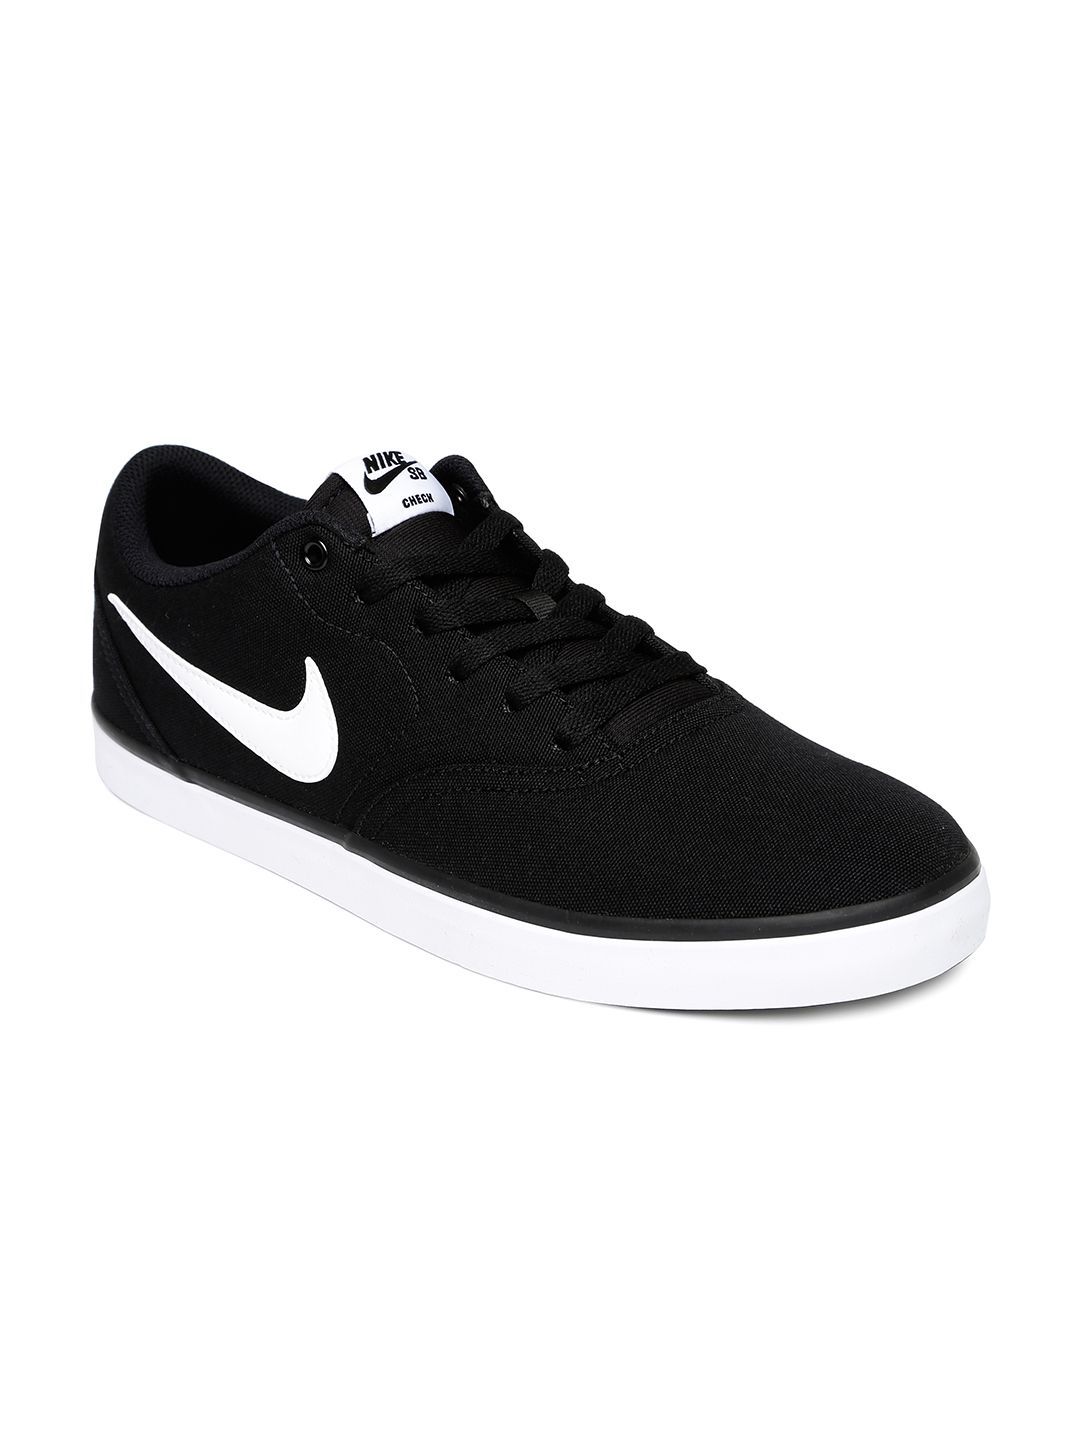 Corte de pelo Sorprendido morfina Nike SkateBoarding CHECK SOLAR Sneakers Black Casual Shoes - Buy Nike  SkateBoarding CHECK SOLAR Sneakers Black Casual Shoes Online at Best Prices  in India on Snapdeal